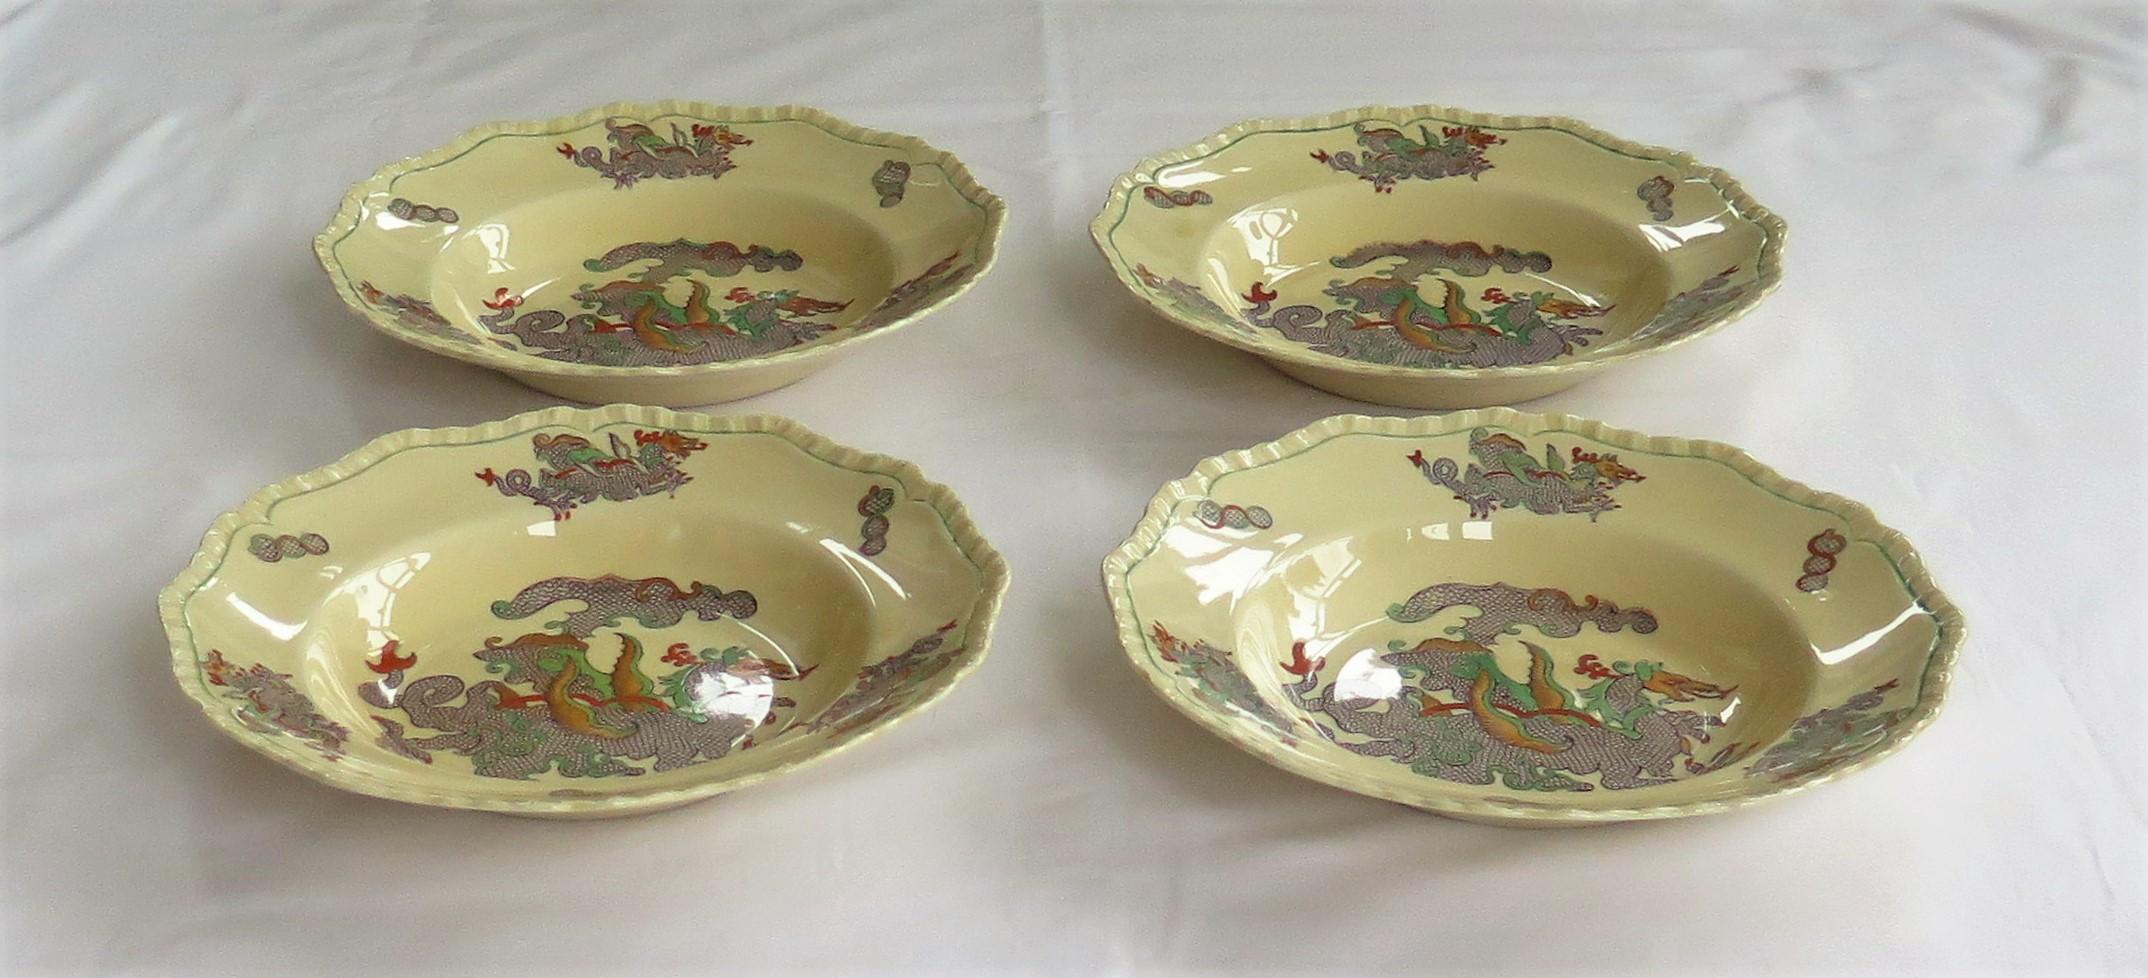 English Set of FOUR Masons Ironstone Large Bowls in Chinese Dragon Pattern, Circa 1900 For Sale